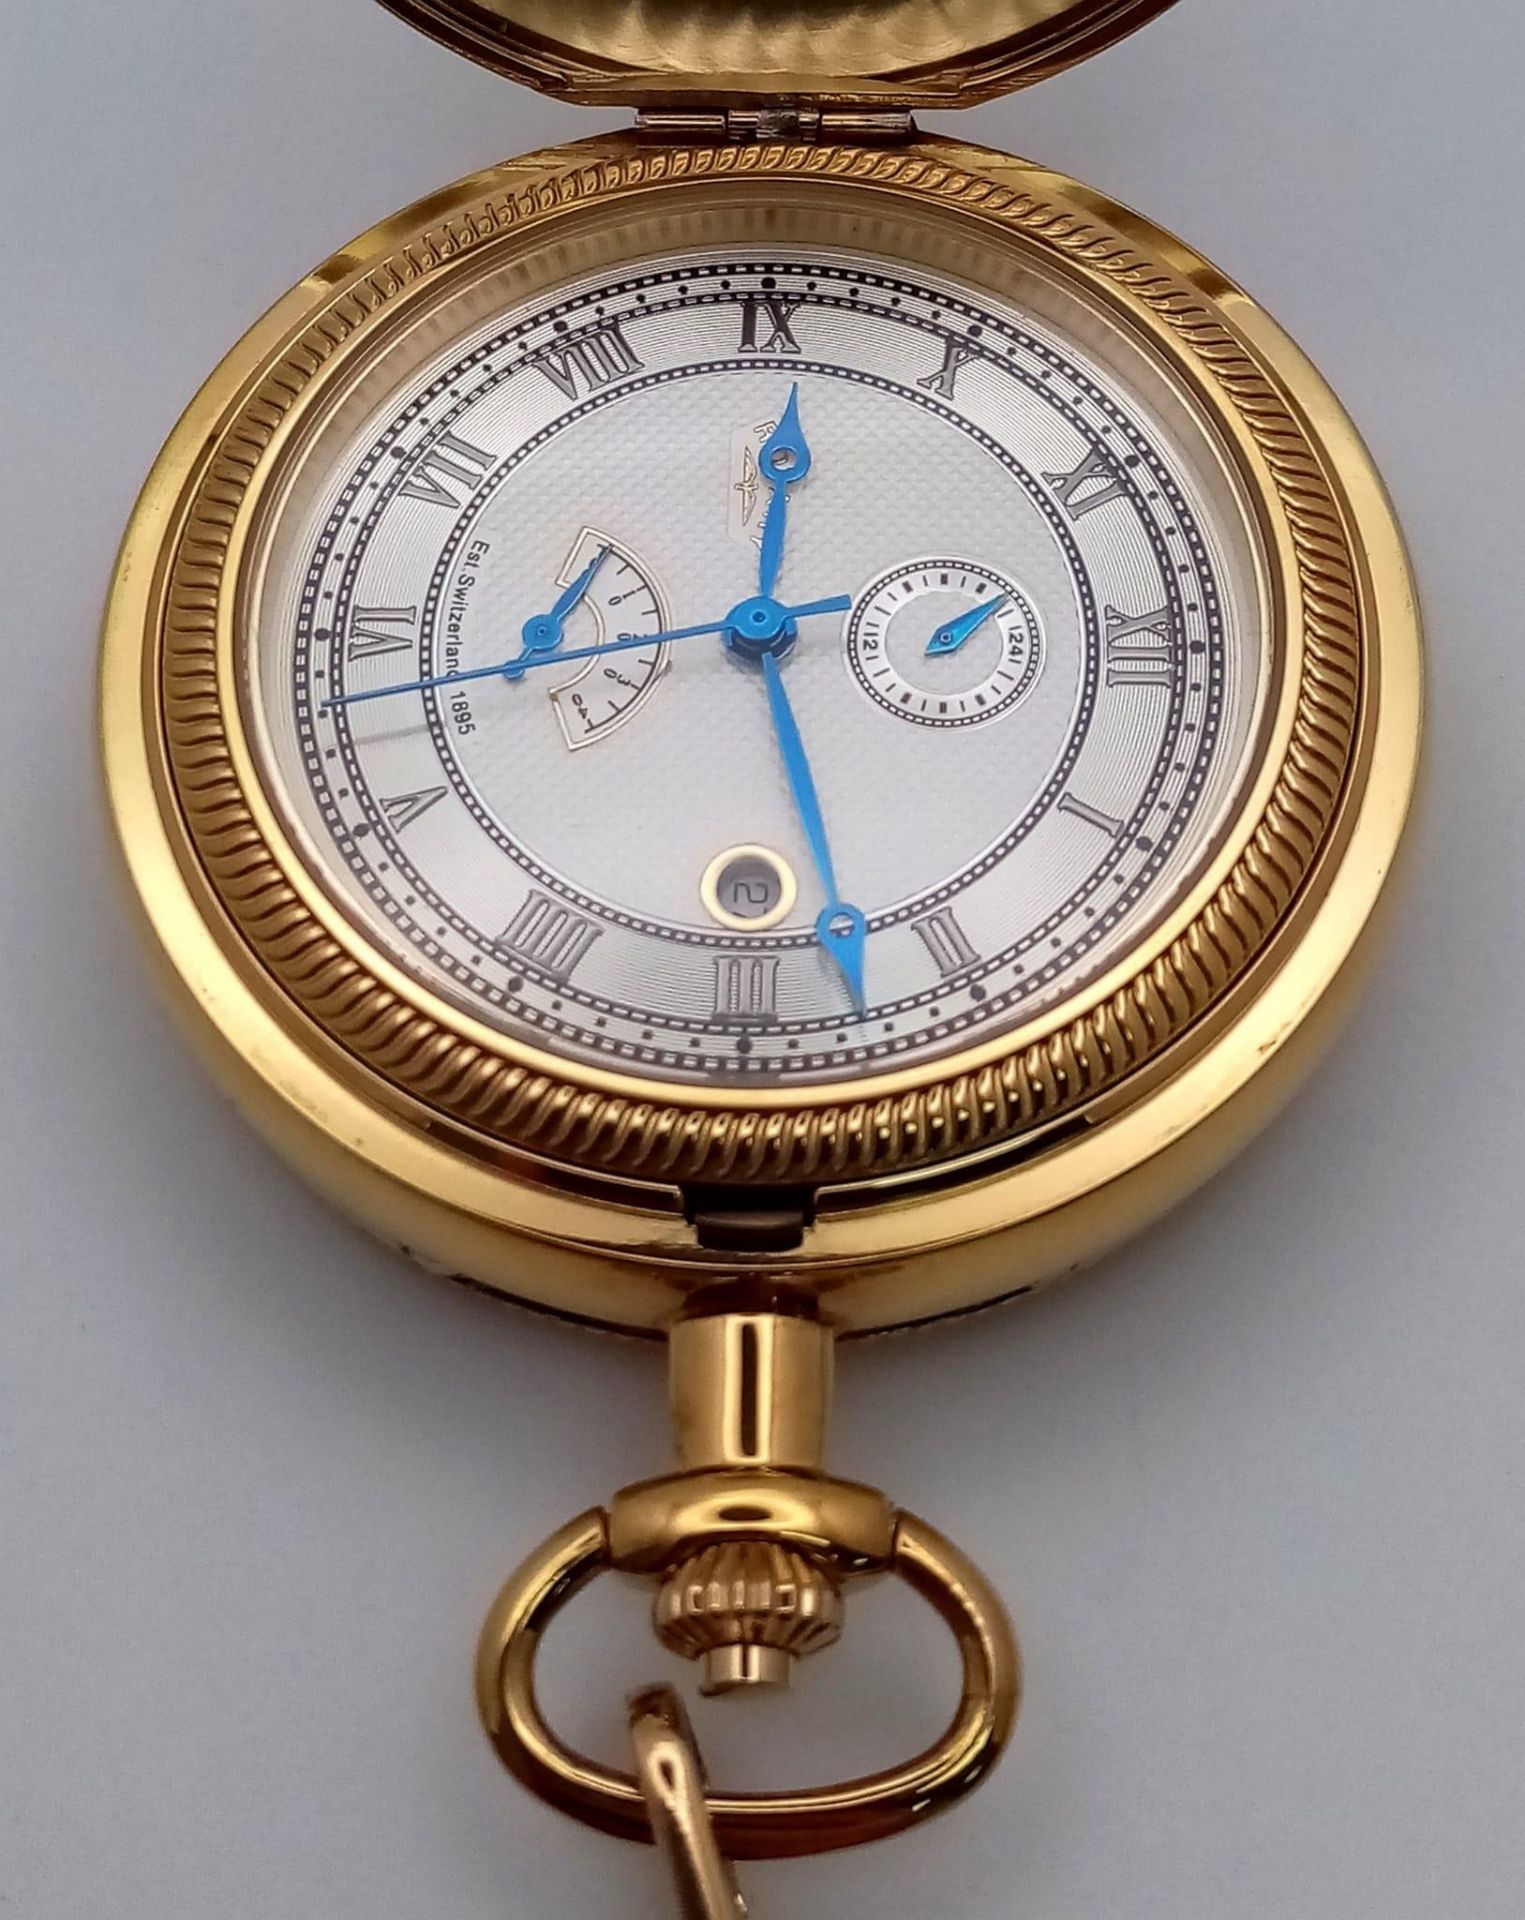 An Unworn Gold Plated Rotary Manual Wind Pocket, Date Watch. 4 Day Power Reserve. With Albert Chain. - Image 5 of 8